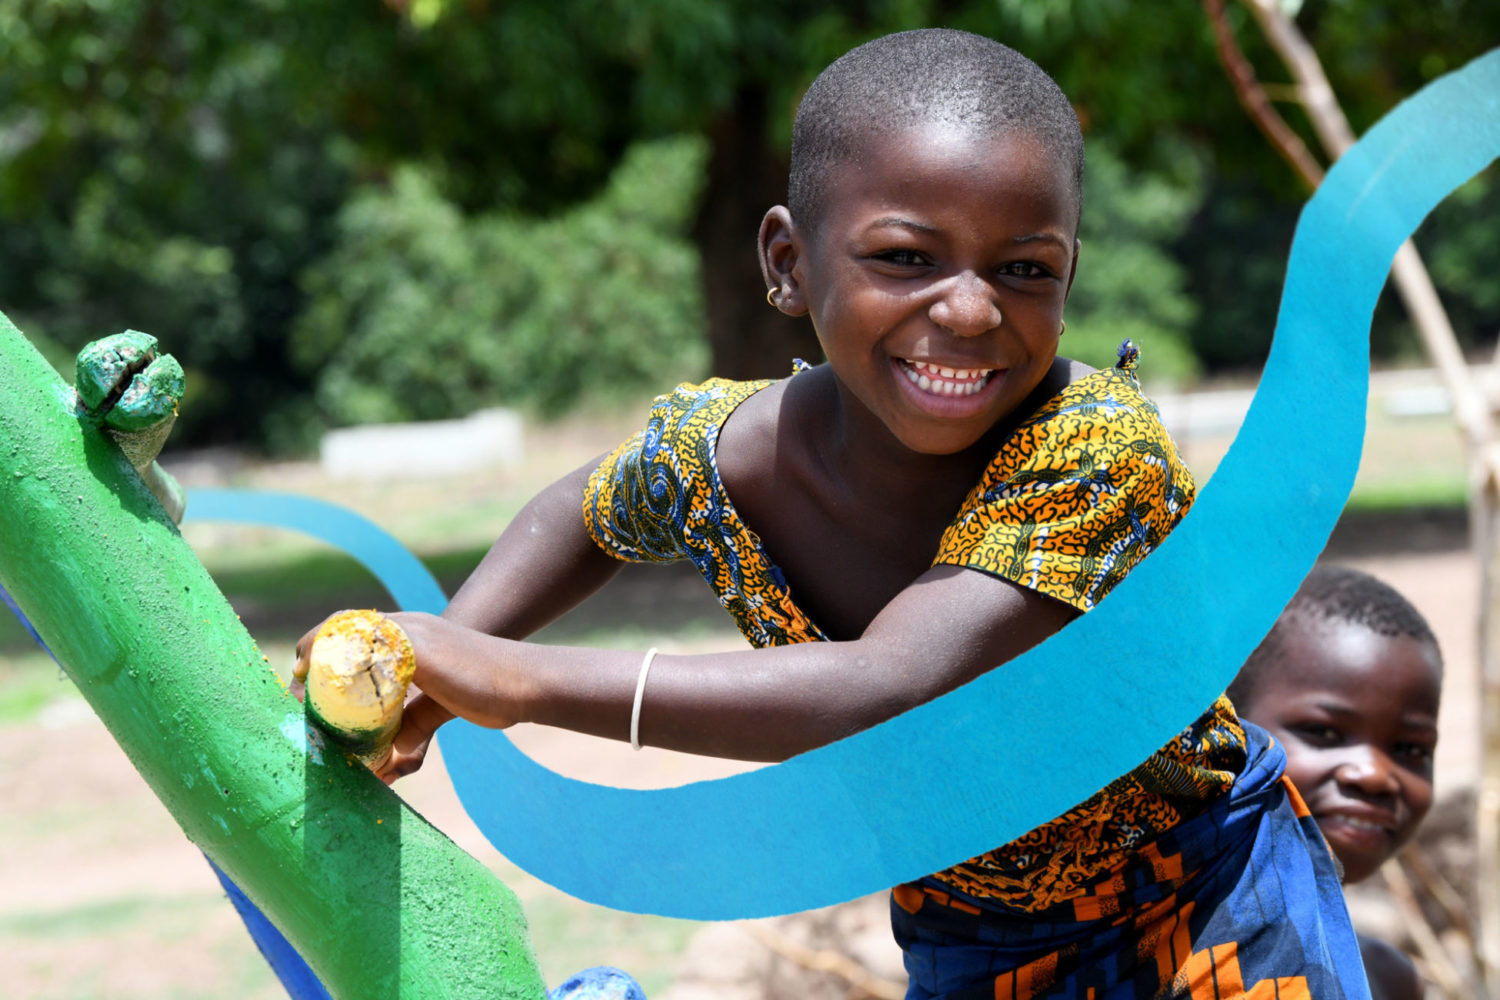 A smiling child plays in the park. A UNICEF-blue streak is overlayed across the image as part of the Gift in Will branding.